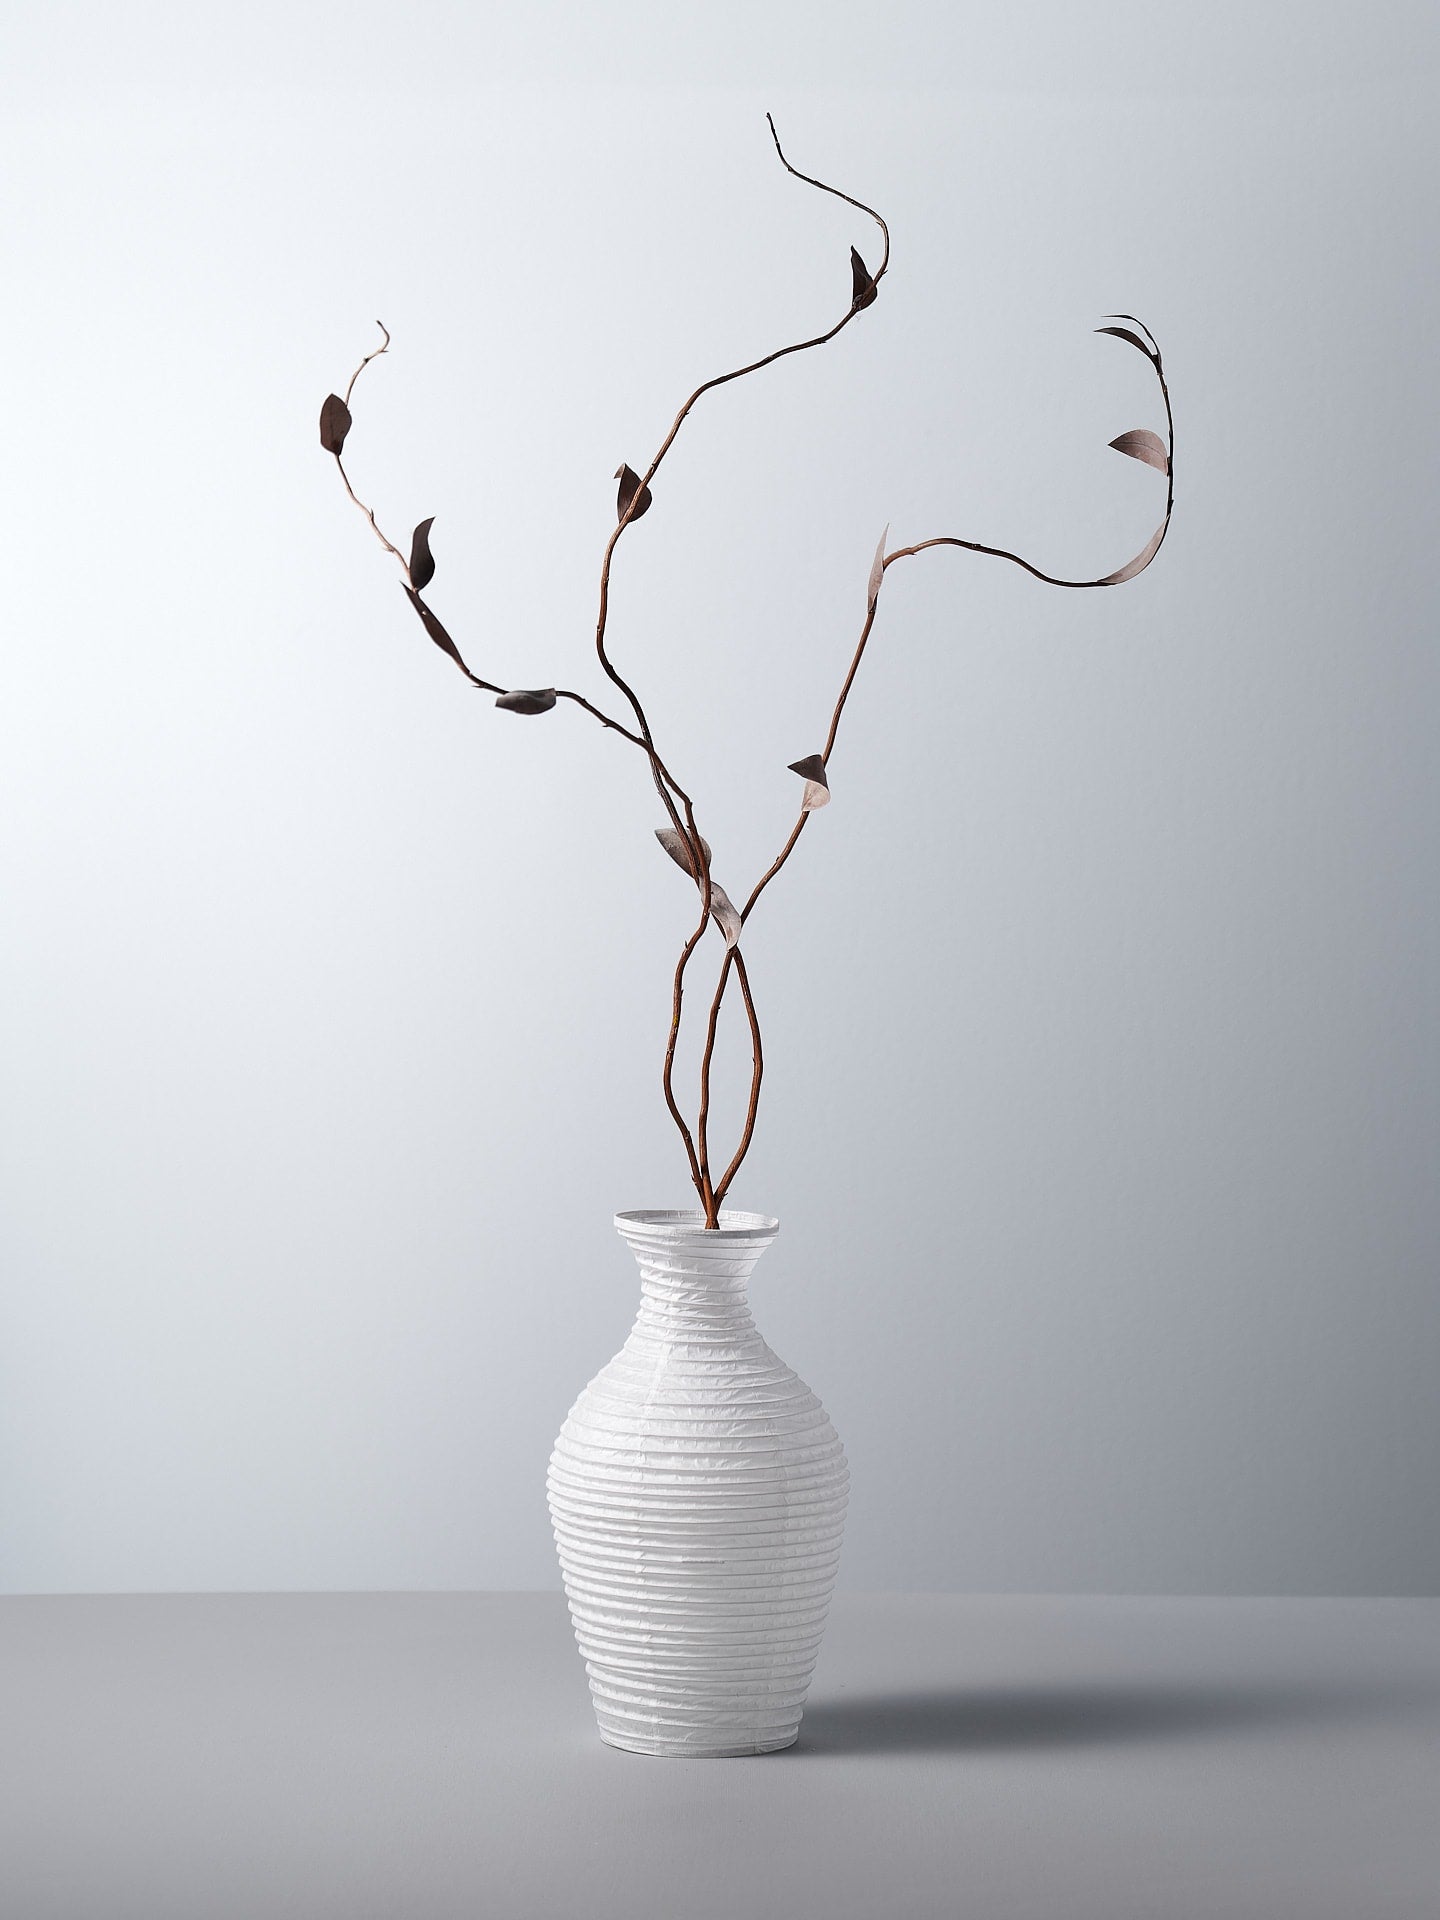 A Nobi-tsutsu Paper Vase – №4 by Hayashi Kougei with branches in it.